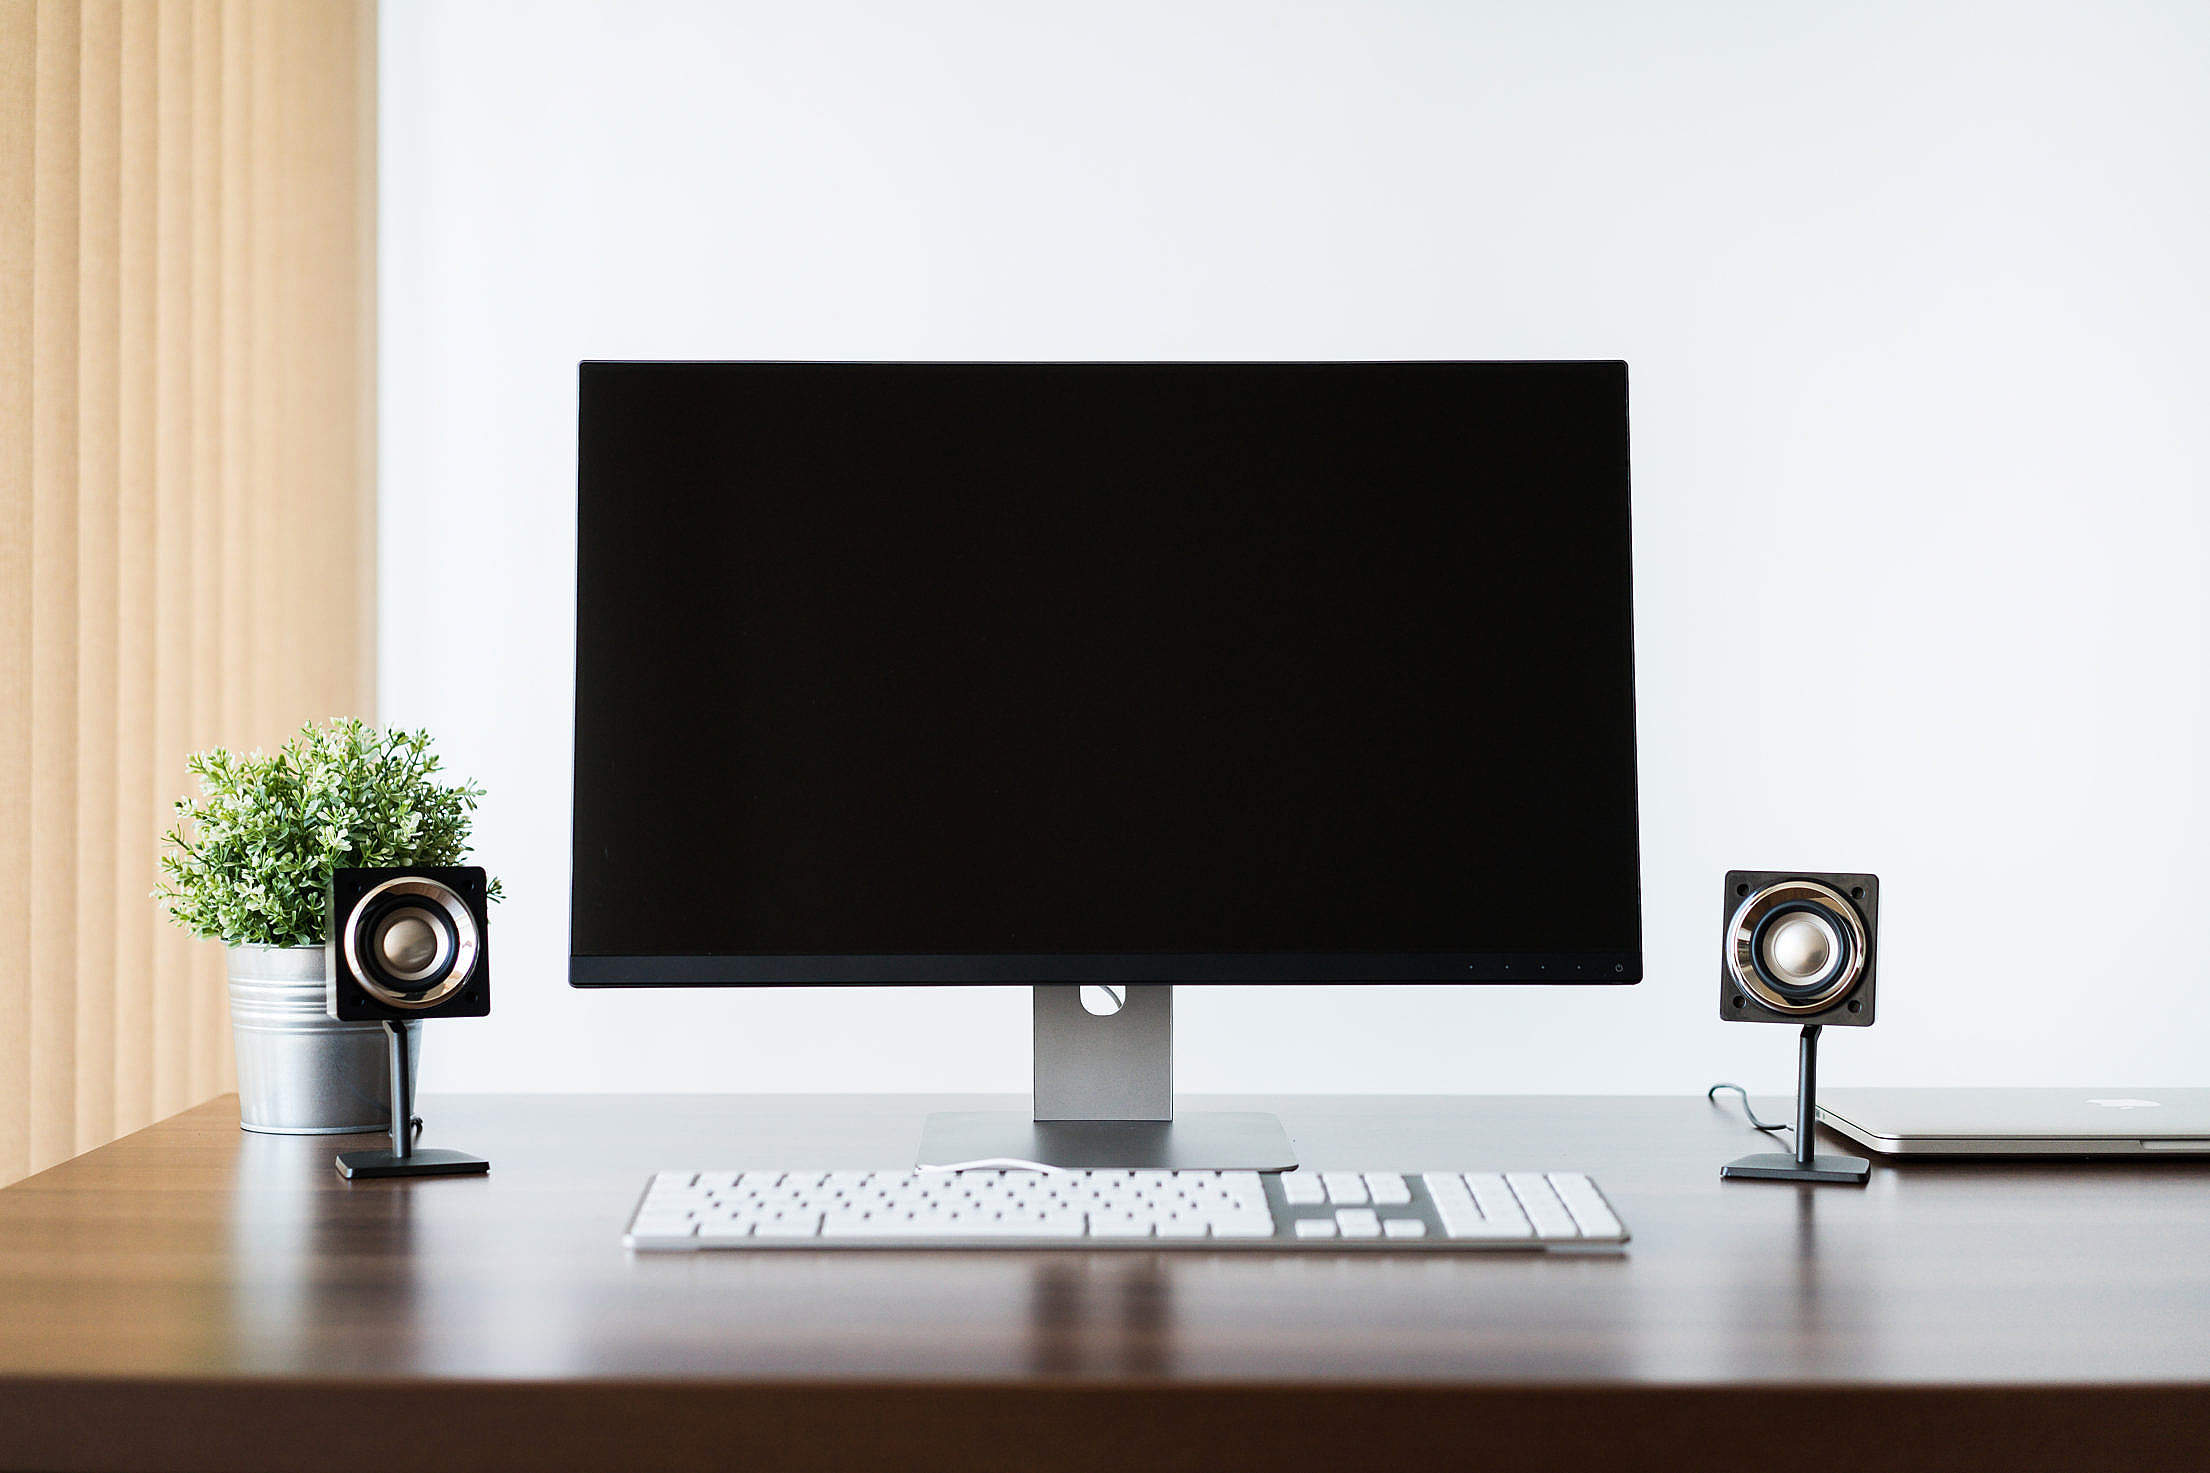 Minimalistic and Clean Home Office Computer Setup Free Stock Photo